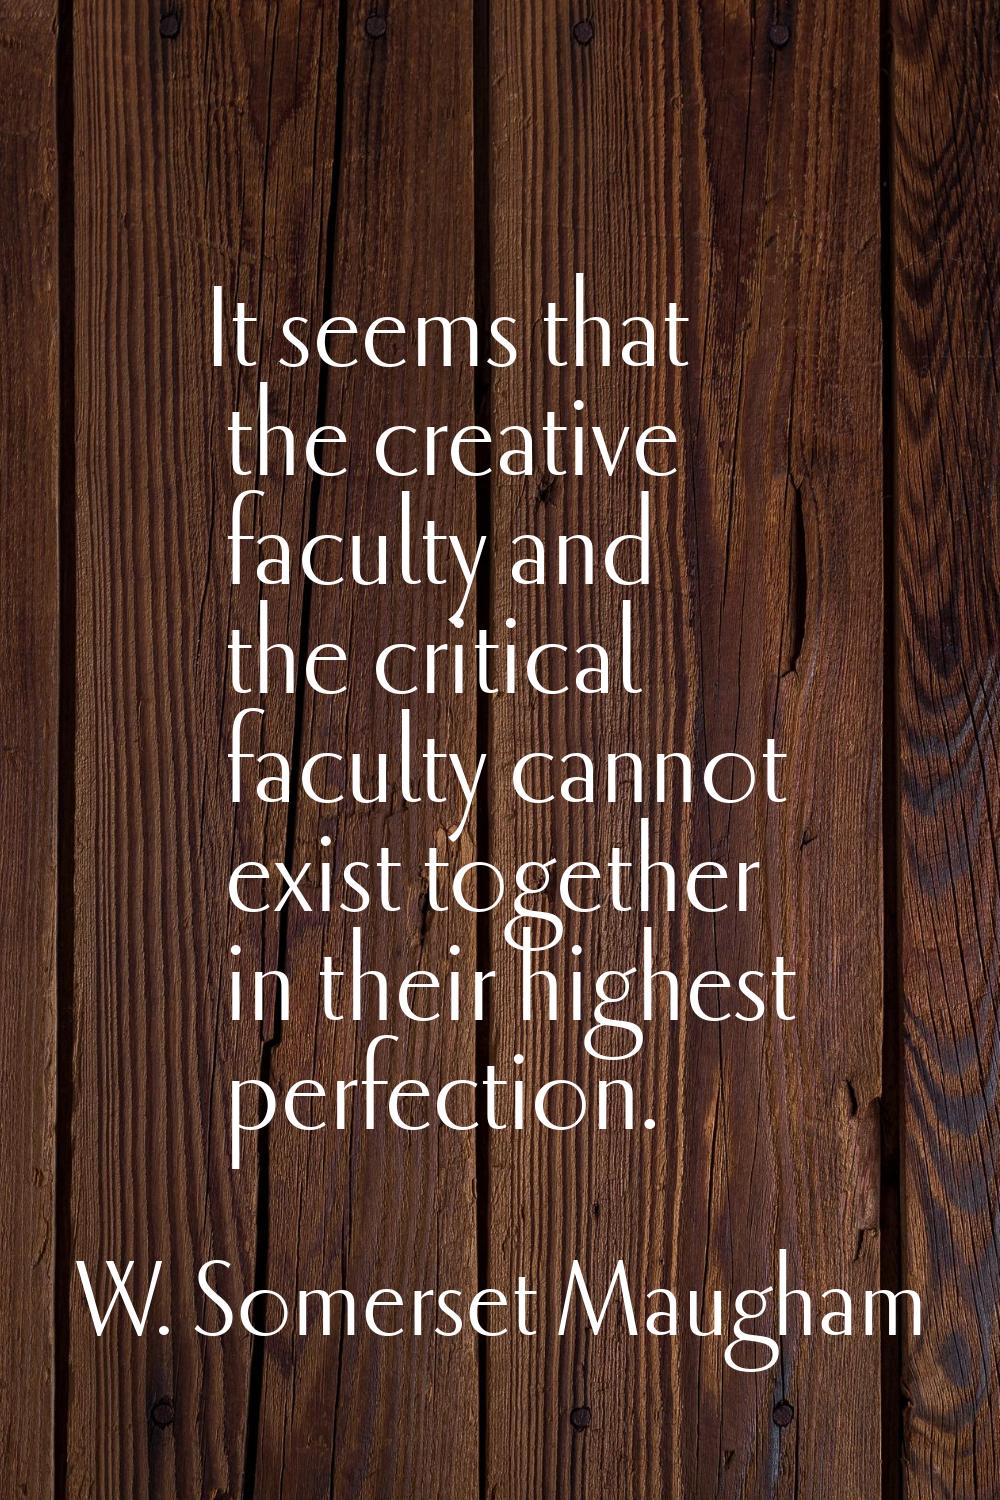 It seems that the creative faculty and the critical faculty cannot exist together in their highest 